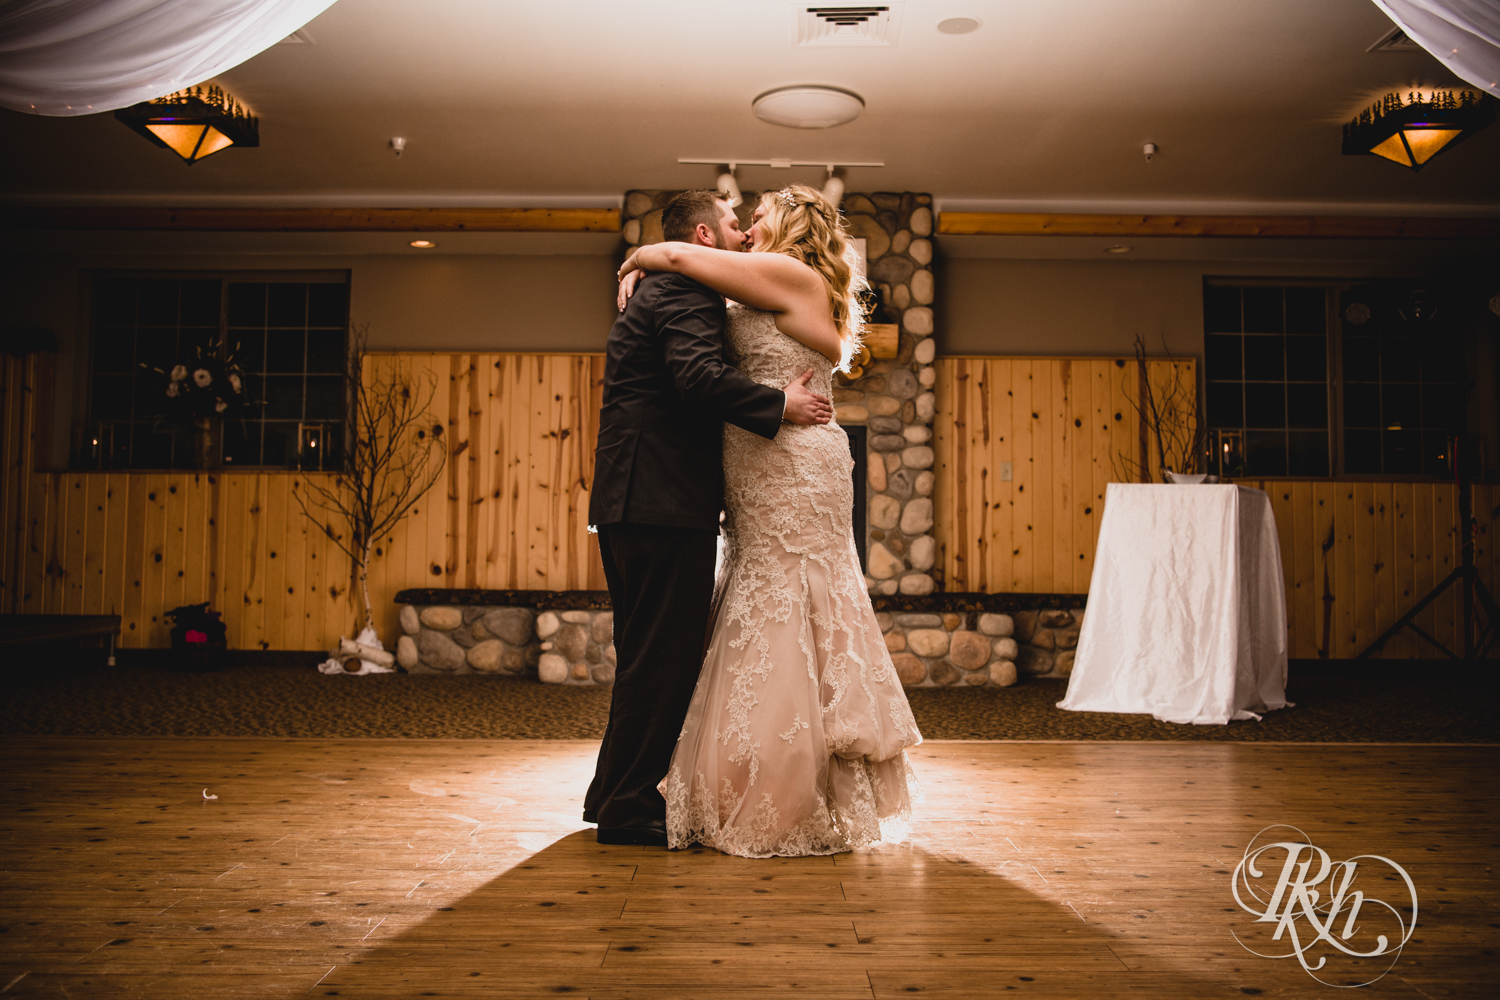 Bride and groom have first dance during winter wedding reception at Whitefish Lodge in Crosslake, Minnesota.